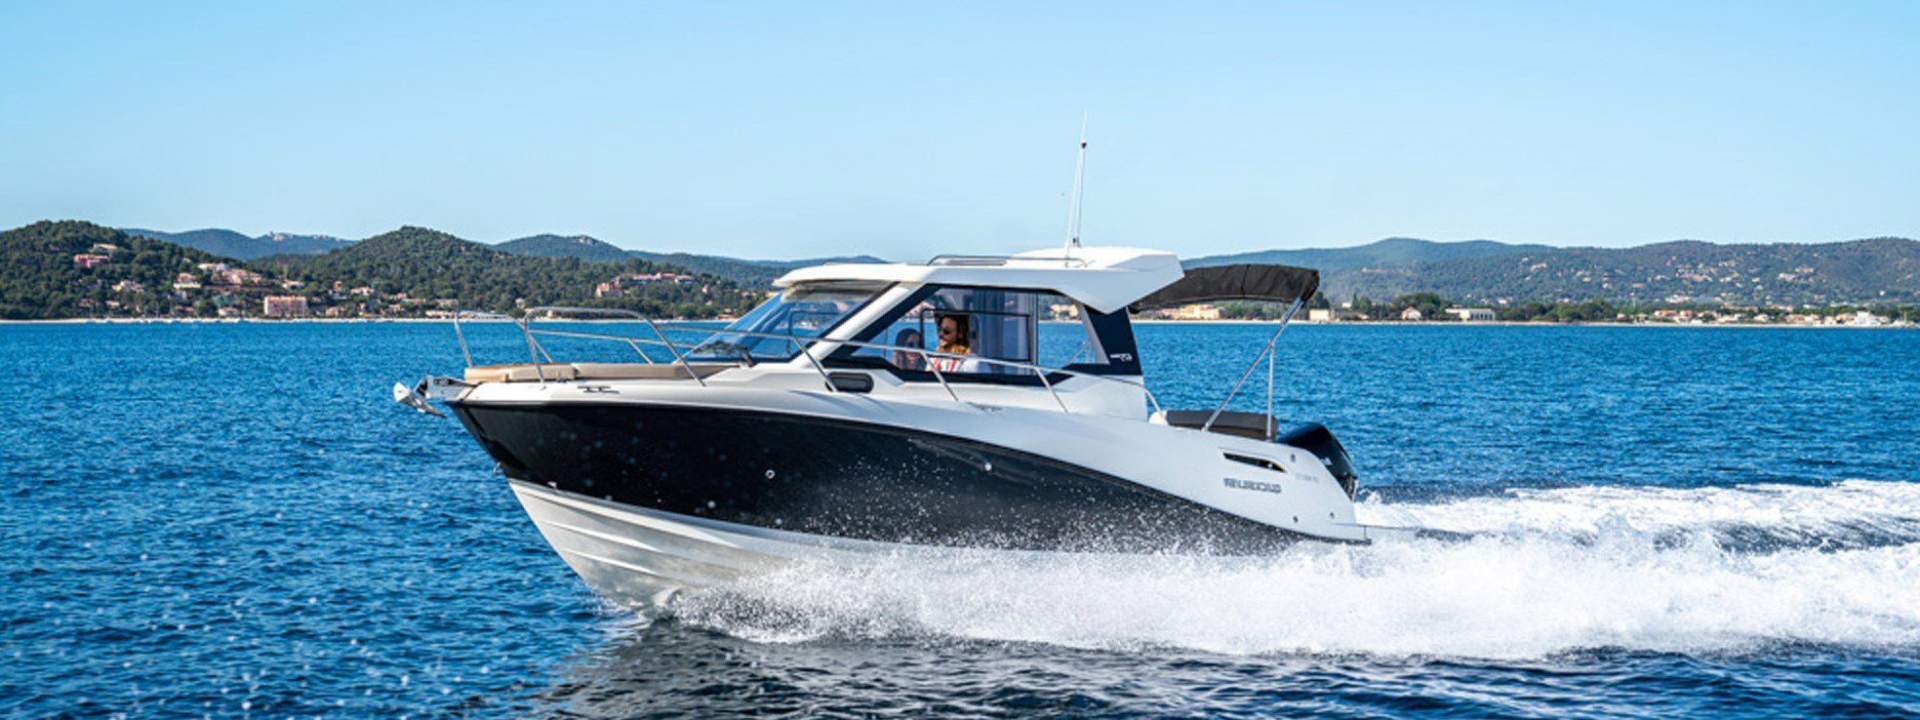 Barco a motor Activ 675 Weekend